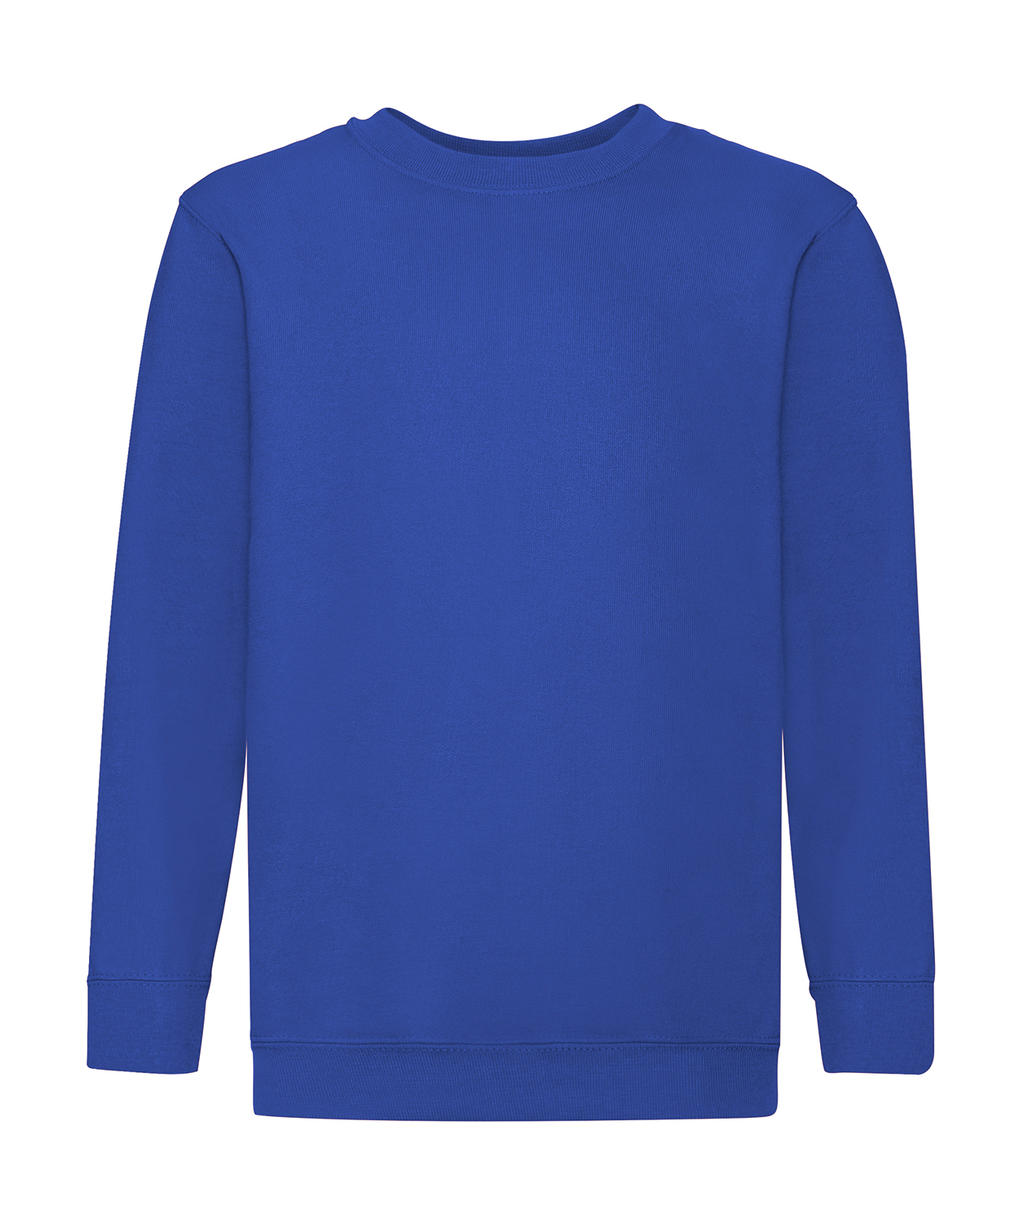  Kids Classic Set-In Sweat in Farbe Royal Blue